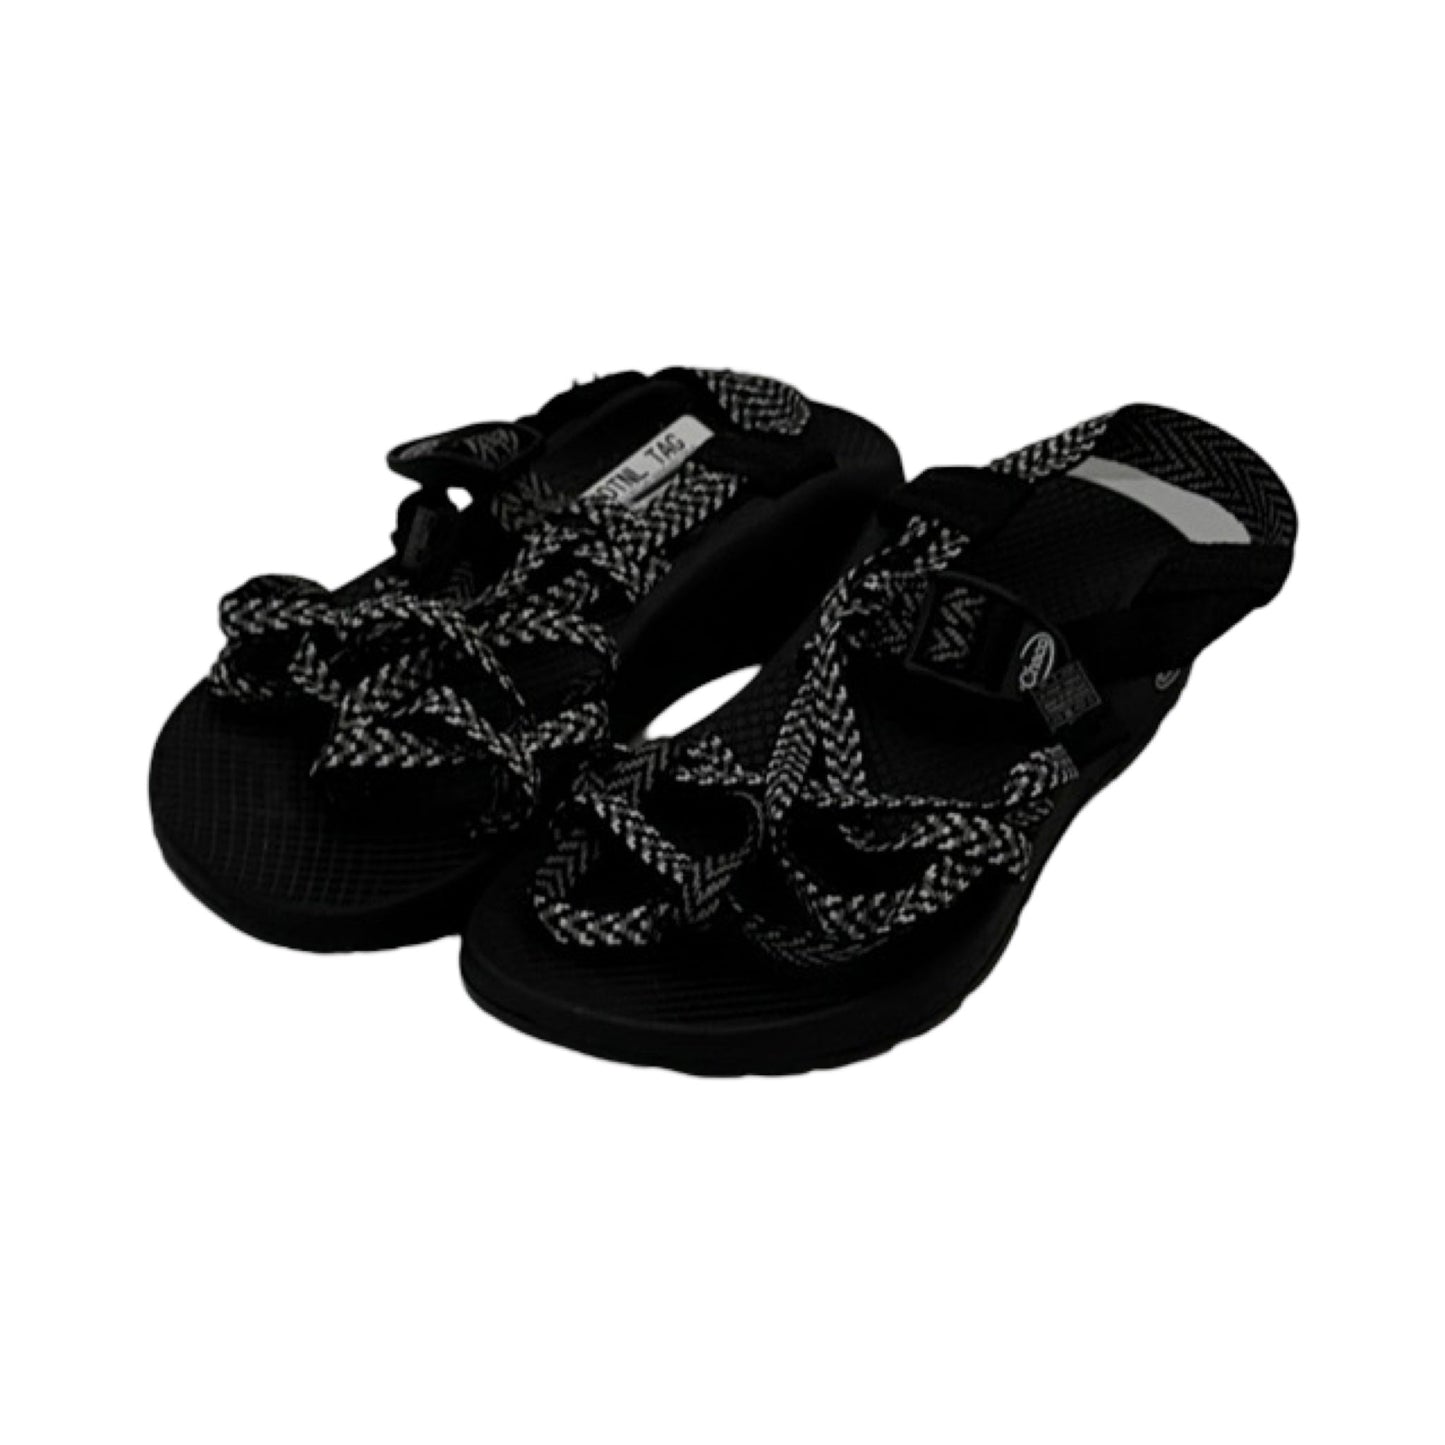 Black Sandals Sport Chacos, Size 8